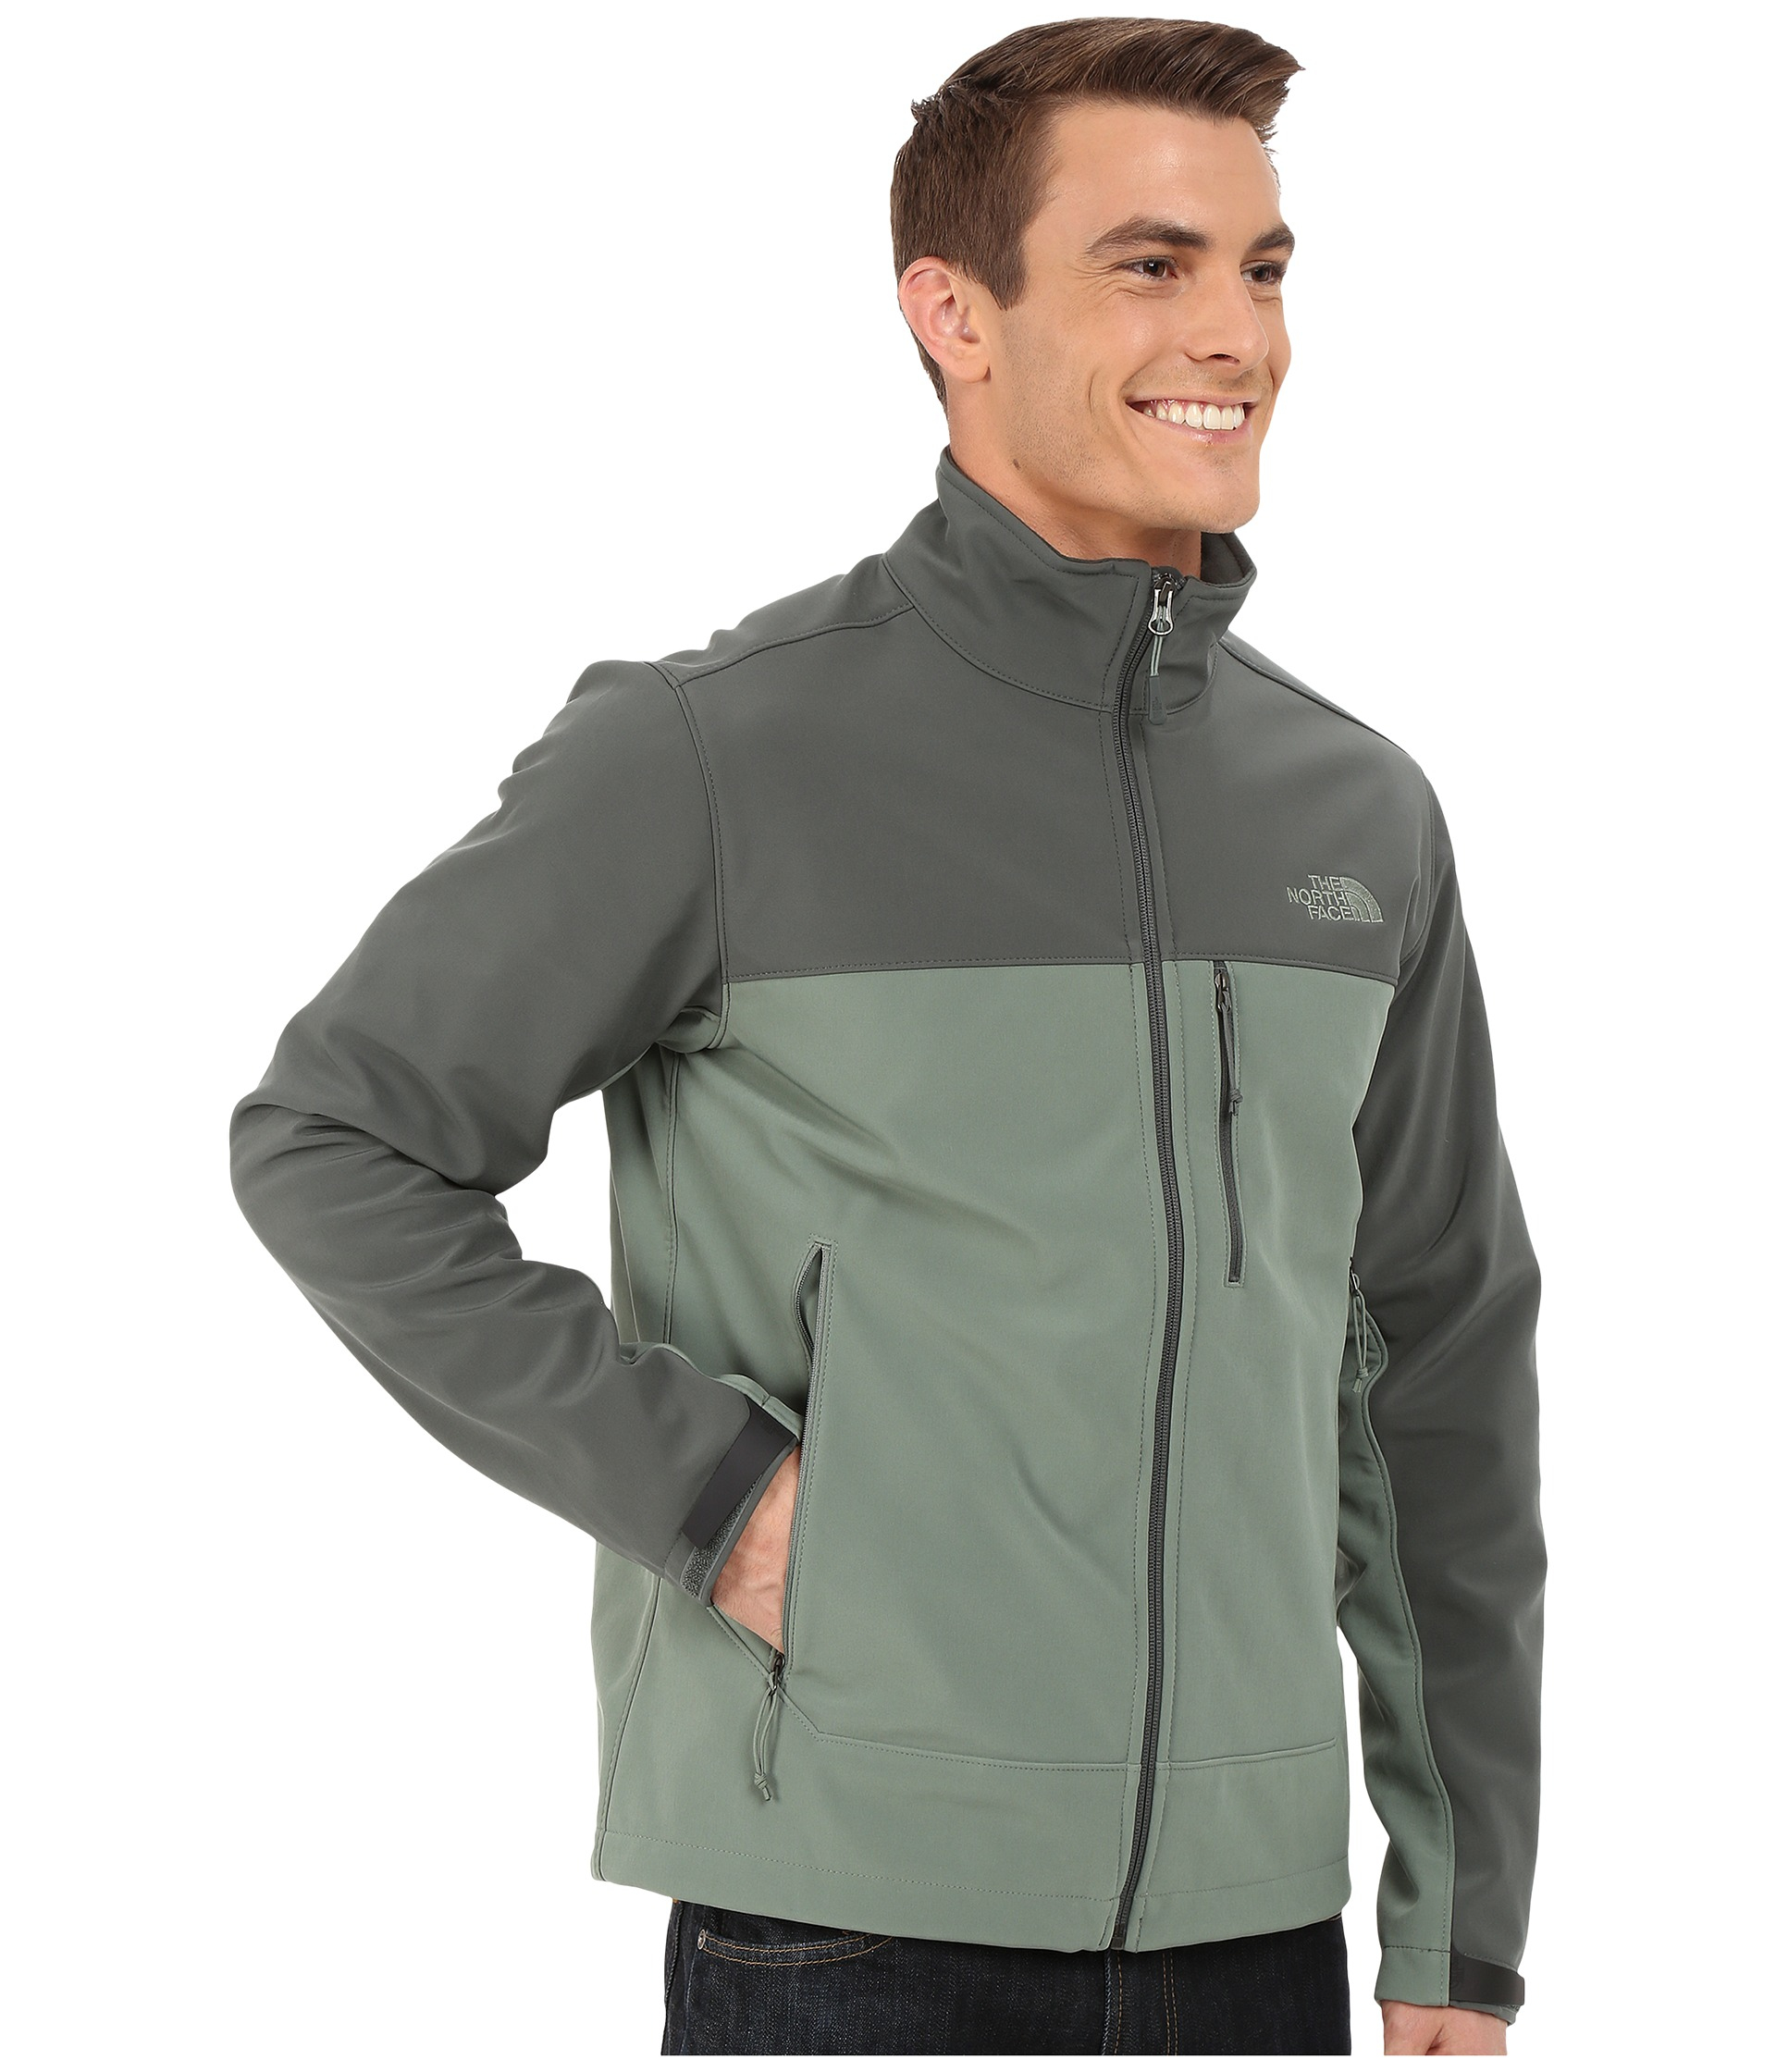 Lyst - The North Face Apex Bionic Jacket in Green for Men